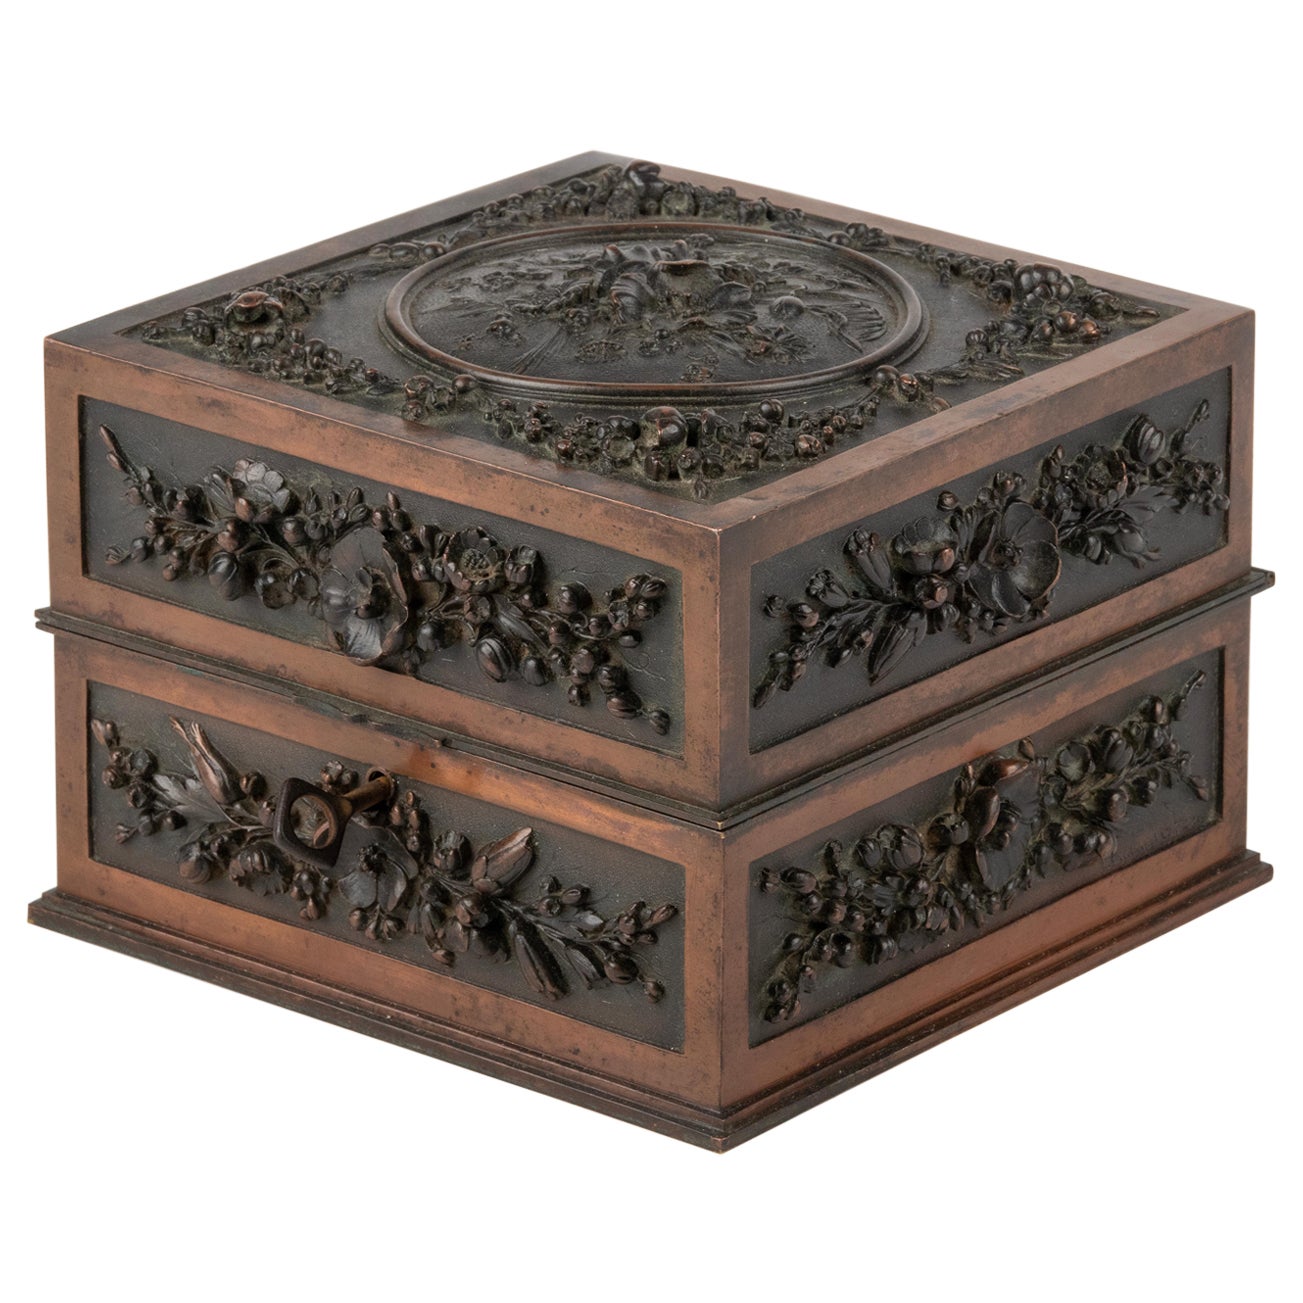 Late 19th Century Black Forest Bronze Decorative Box by Leopold Oudry & Cie. For Sale